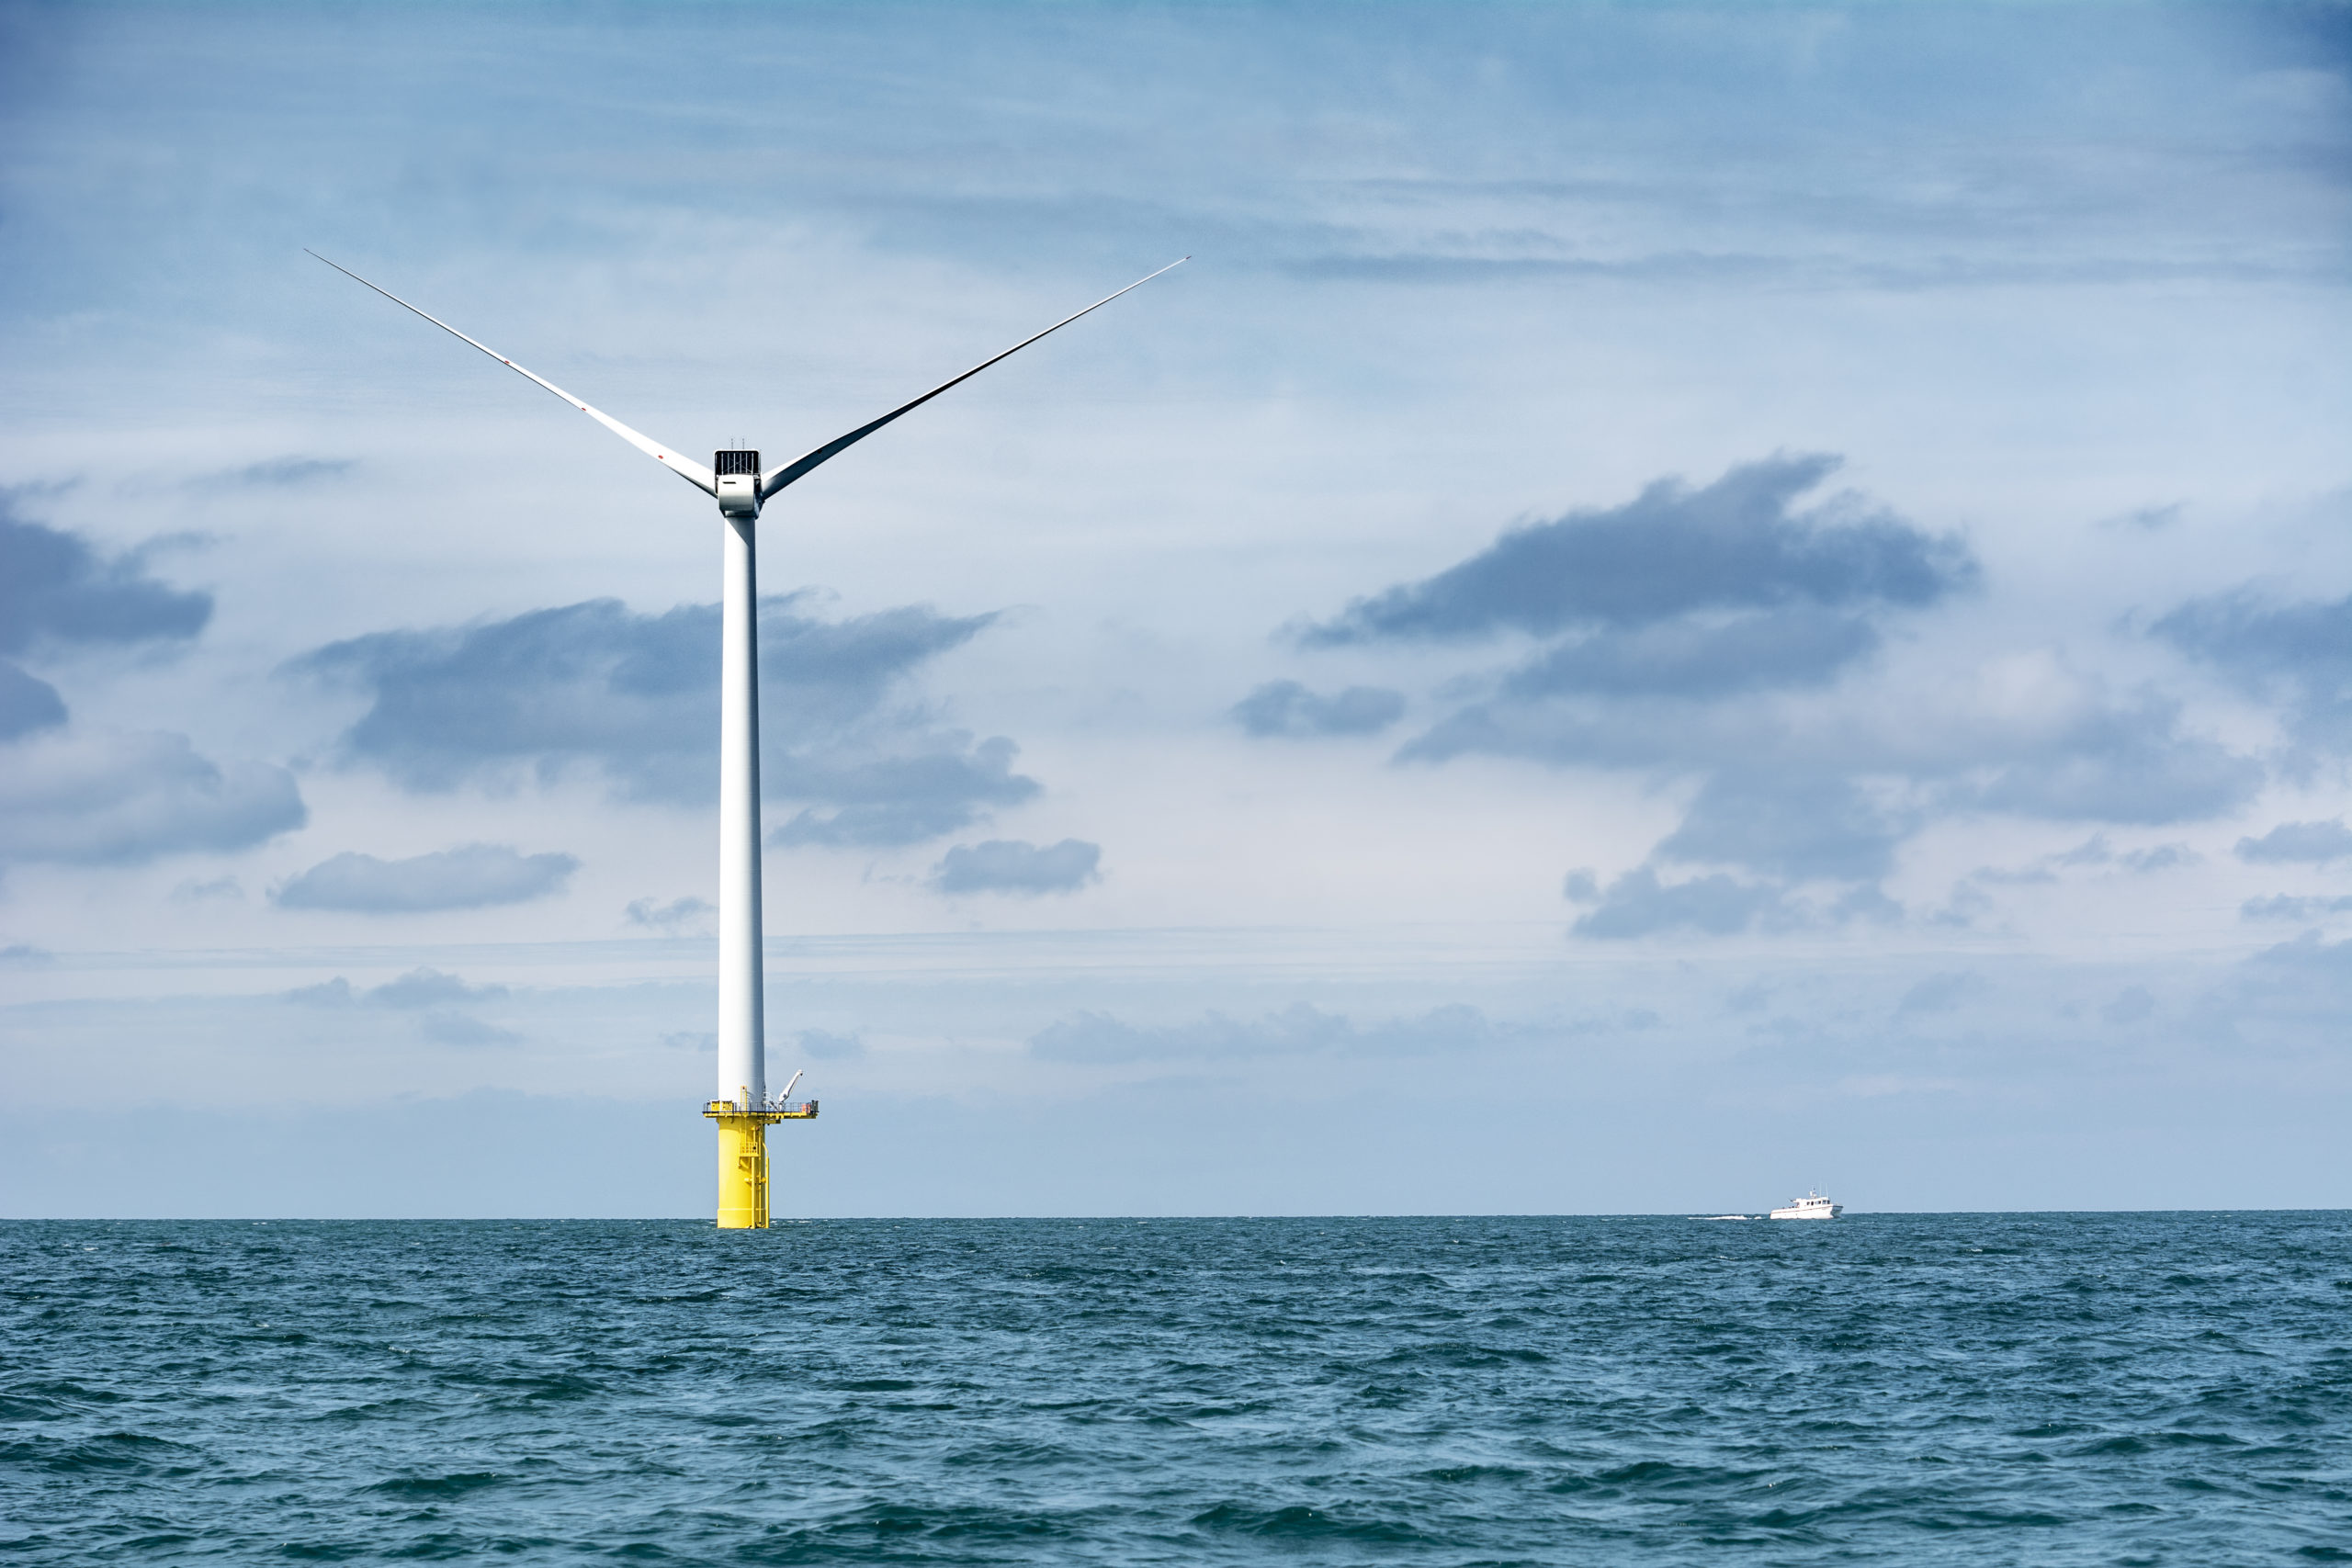 Massachusetts Residents Urge the Commonwealth to Build an Ocean Grid for Offshore Wind